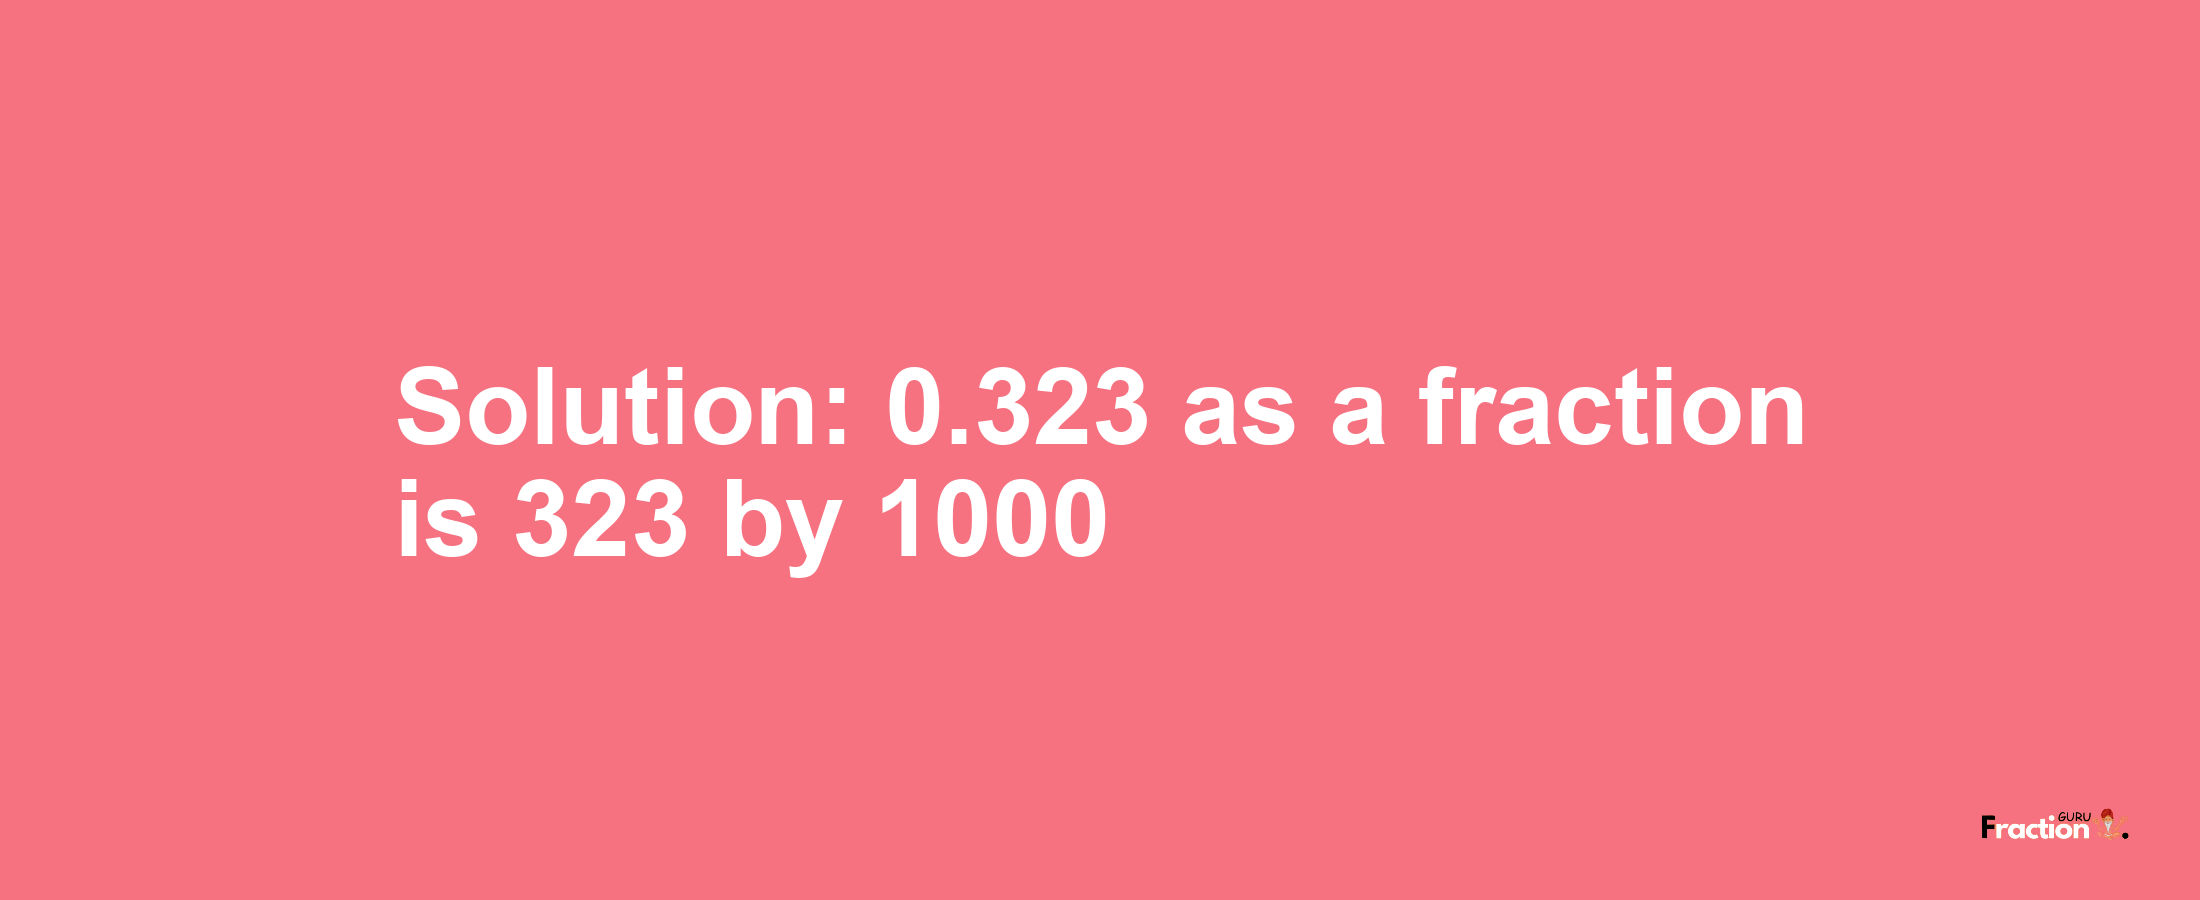 Solution:0.323 as a fraction is 323/1000